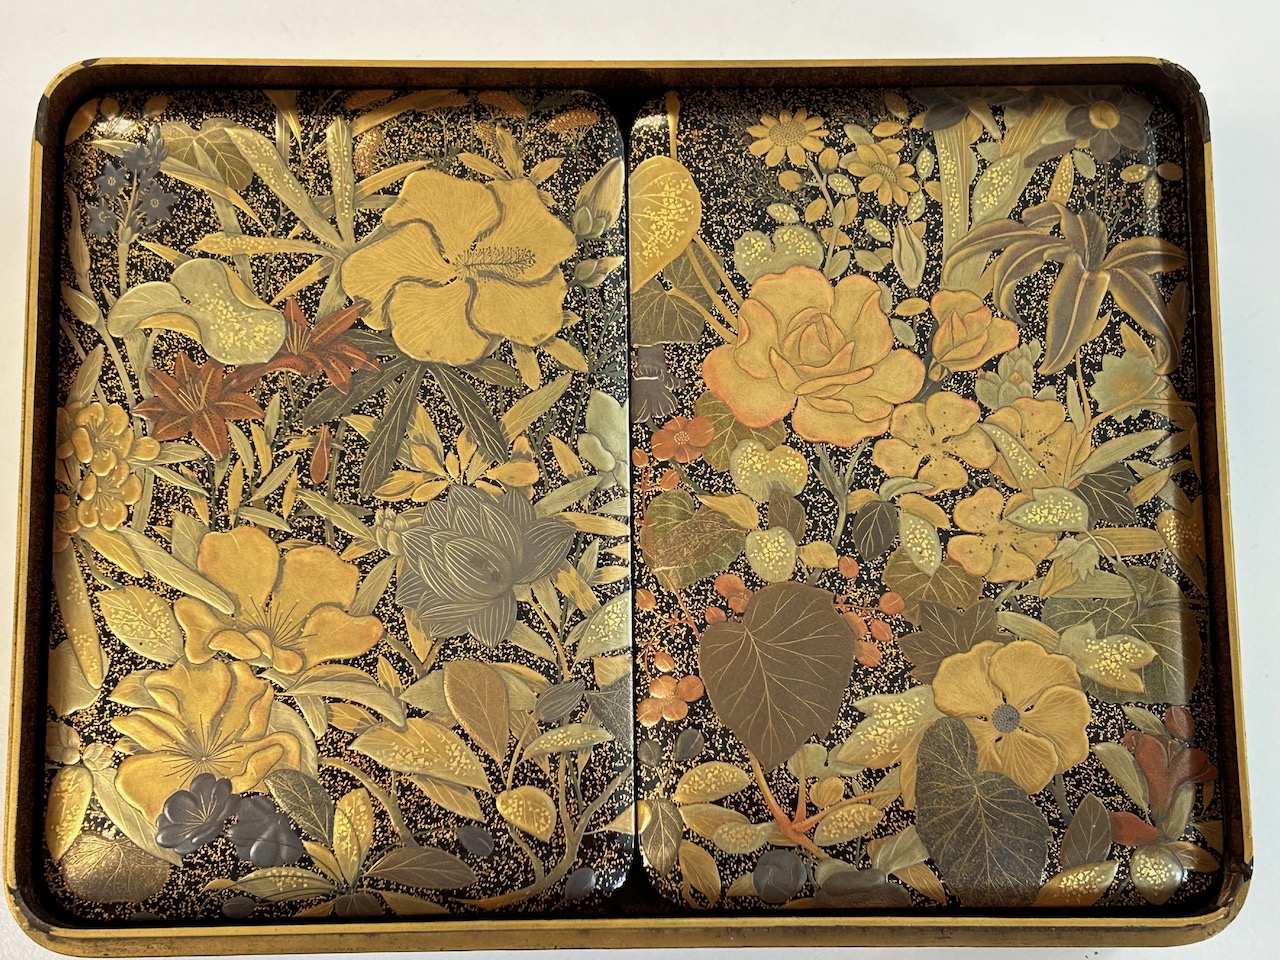 A 19th century Japanese gold lacquer box with interior tray and two boxes - Image 3 of 23